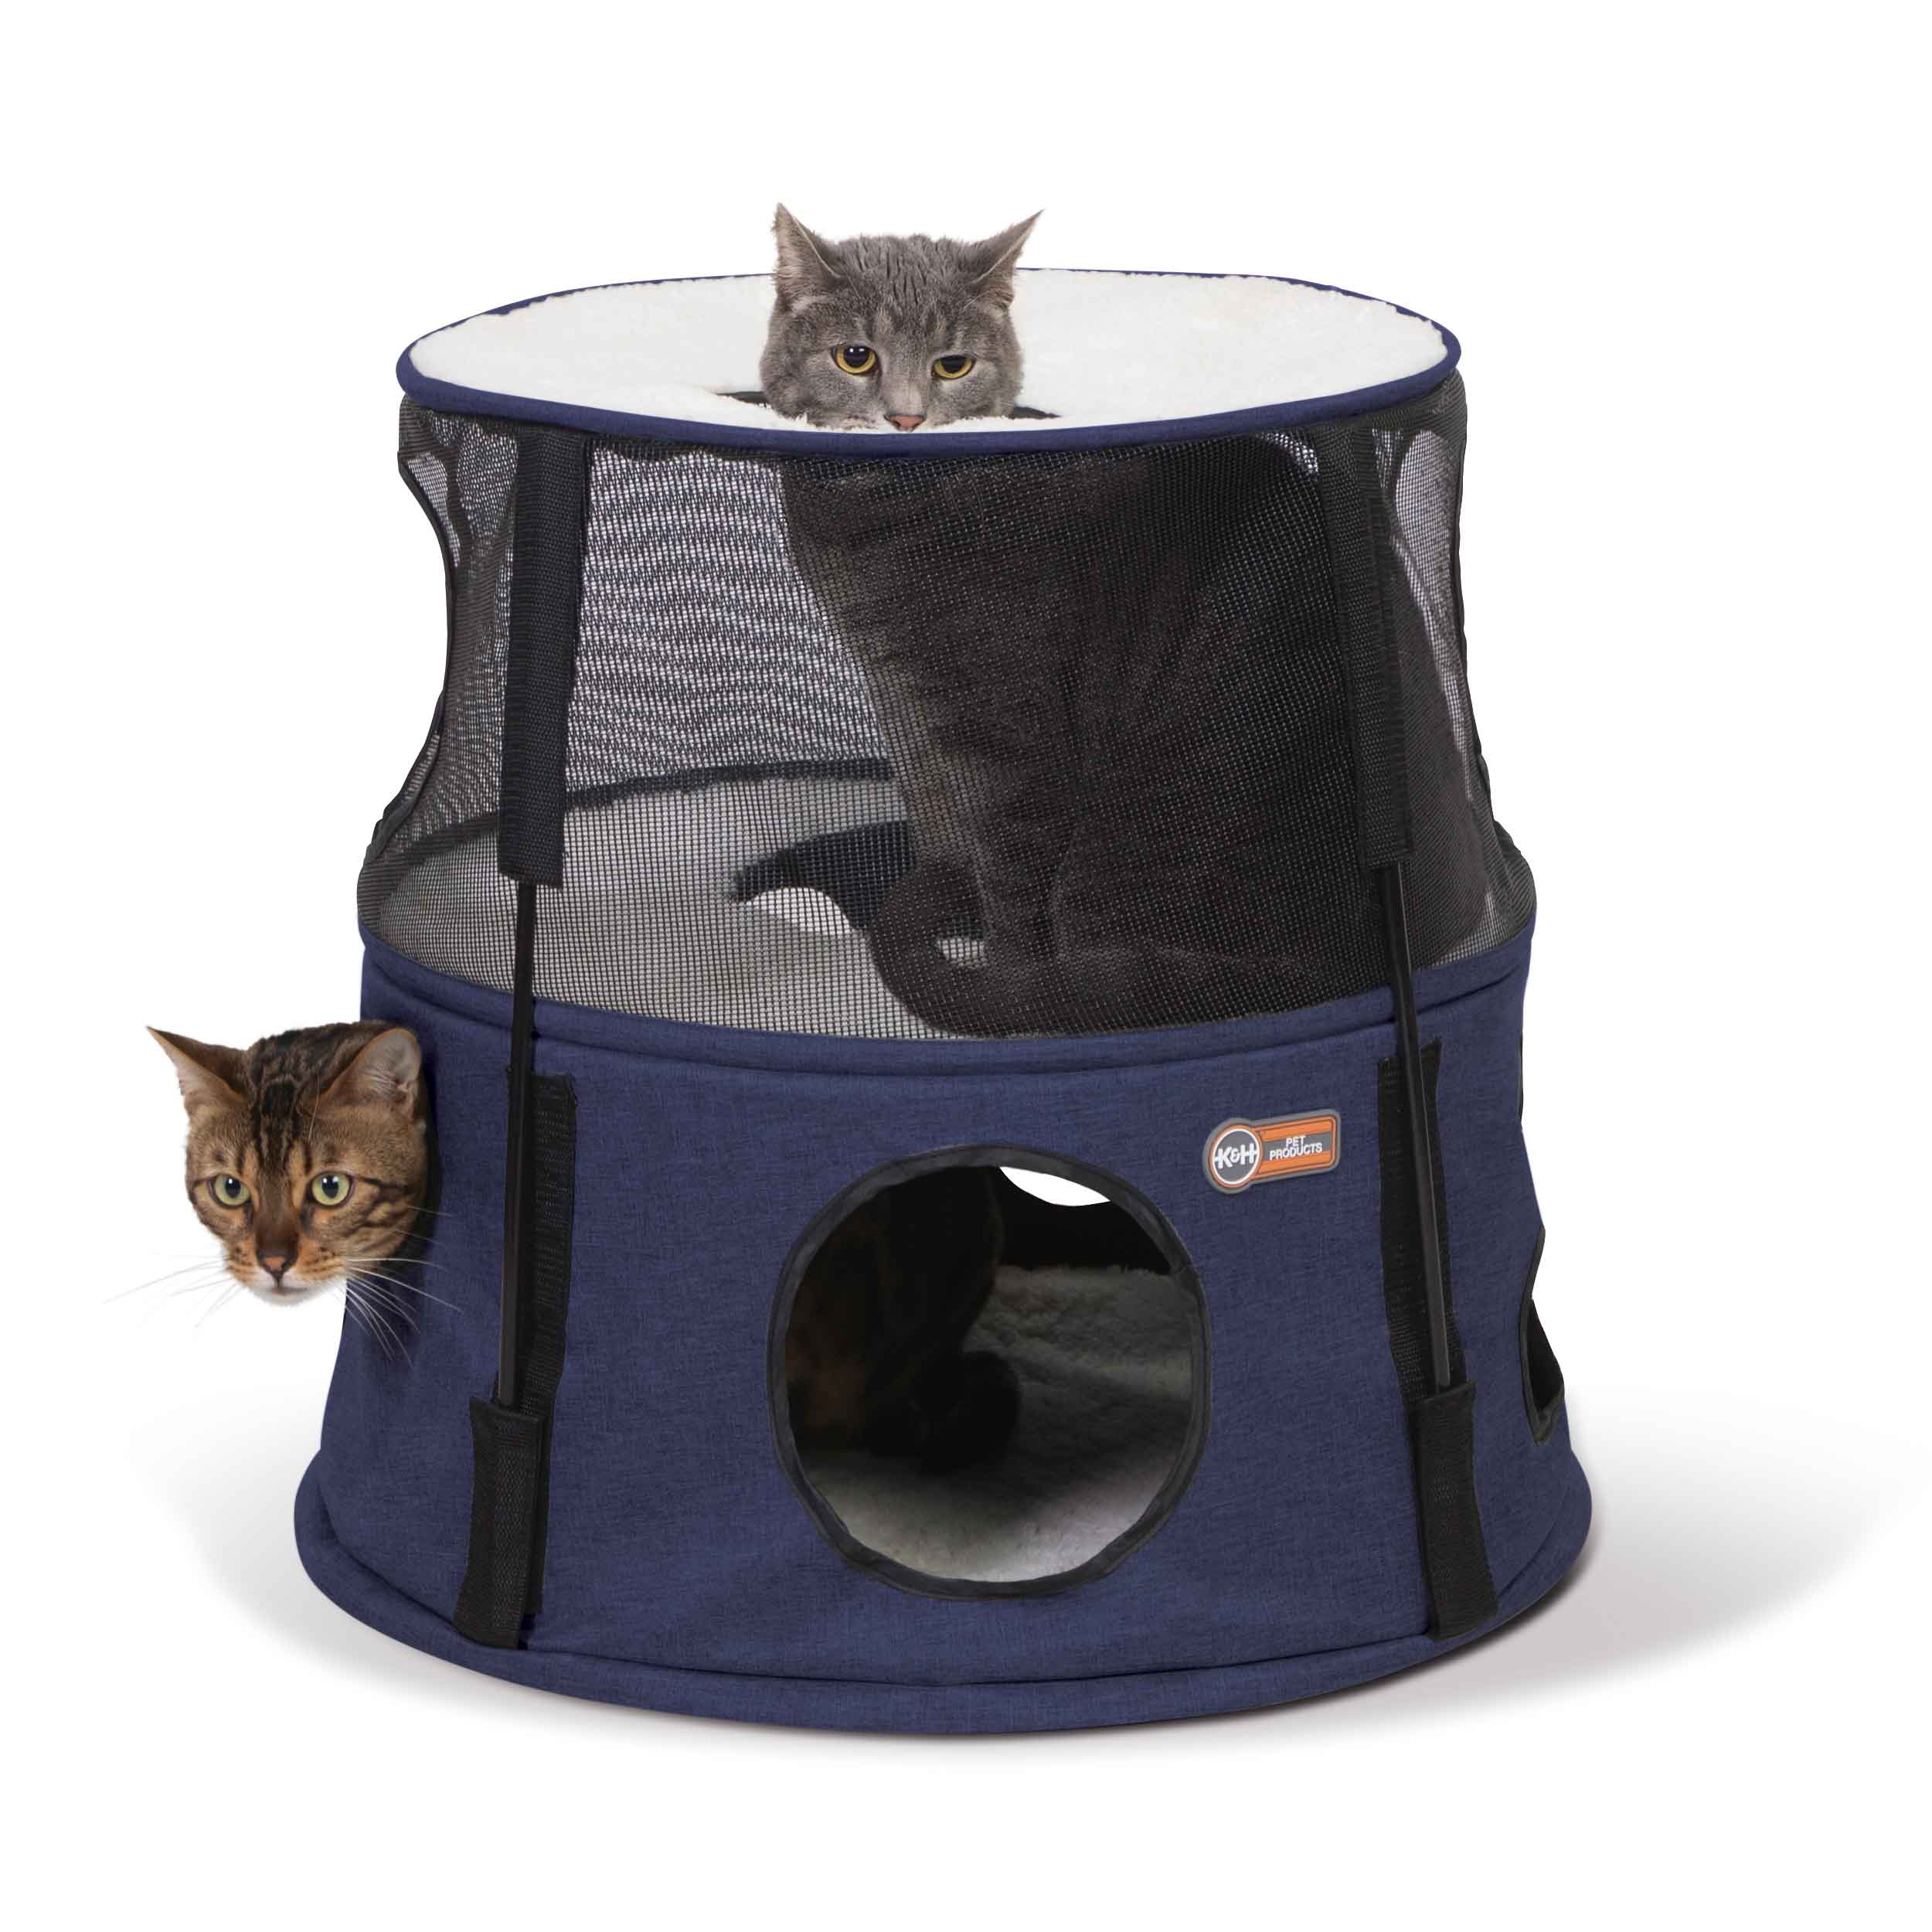 kh100550187 Kitty Tower 2 Story